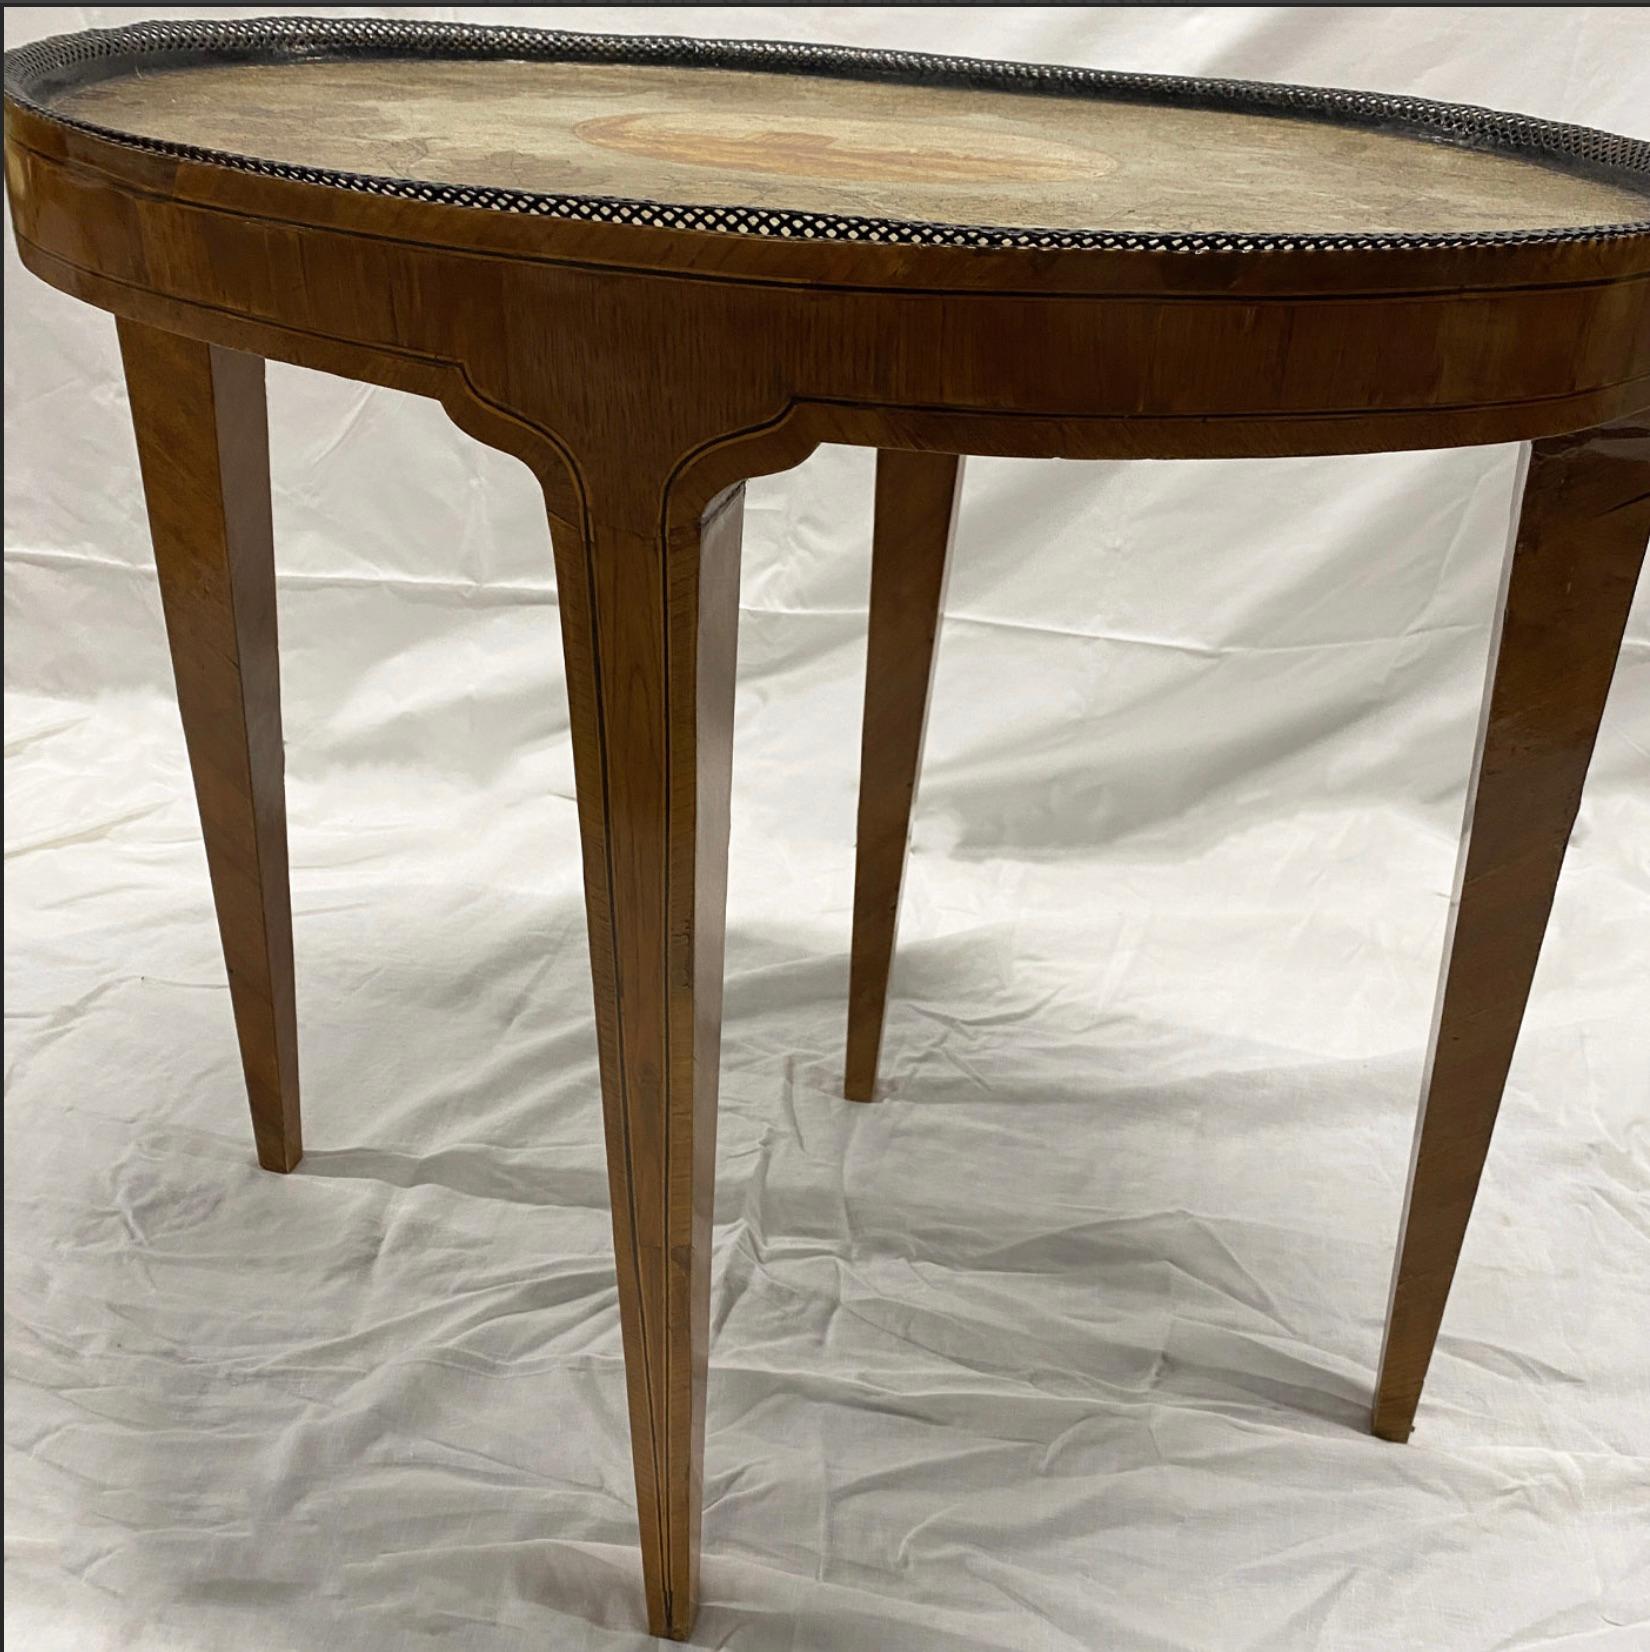 Oval table with tapered legs and landscape scene painted on top

Dimension: 29″L x 23″W x 30″H